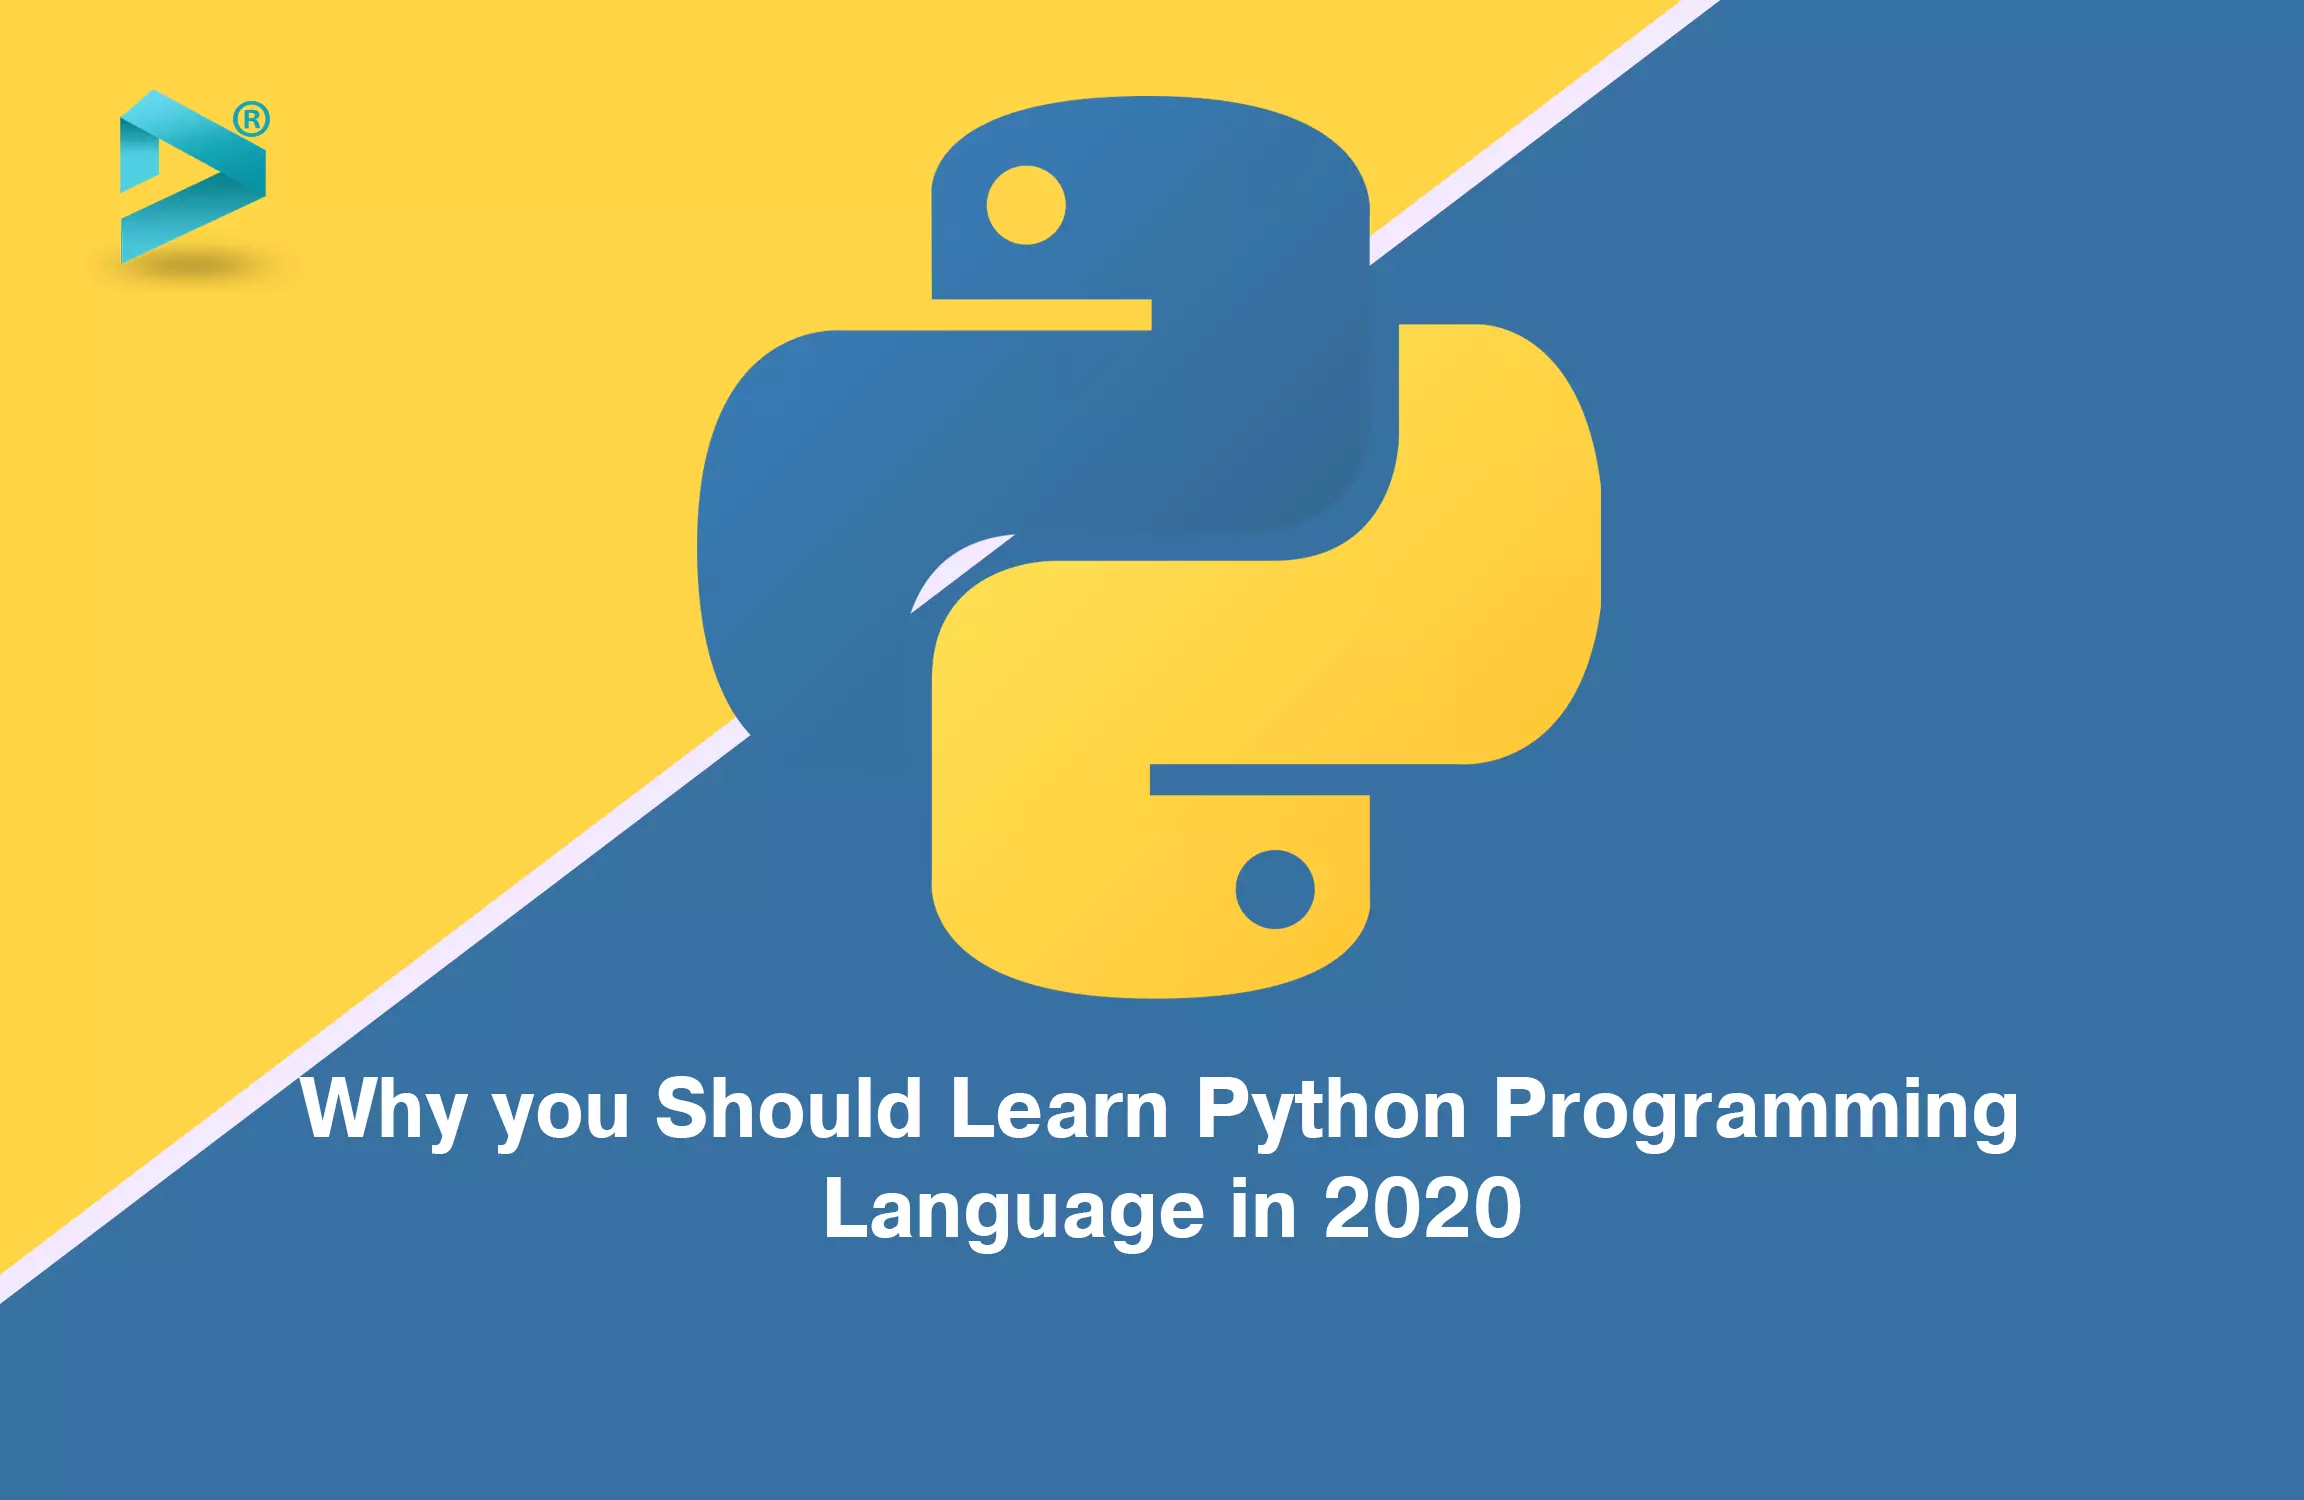 Why you should Learn Python Programming Language in 2020